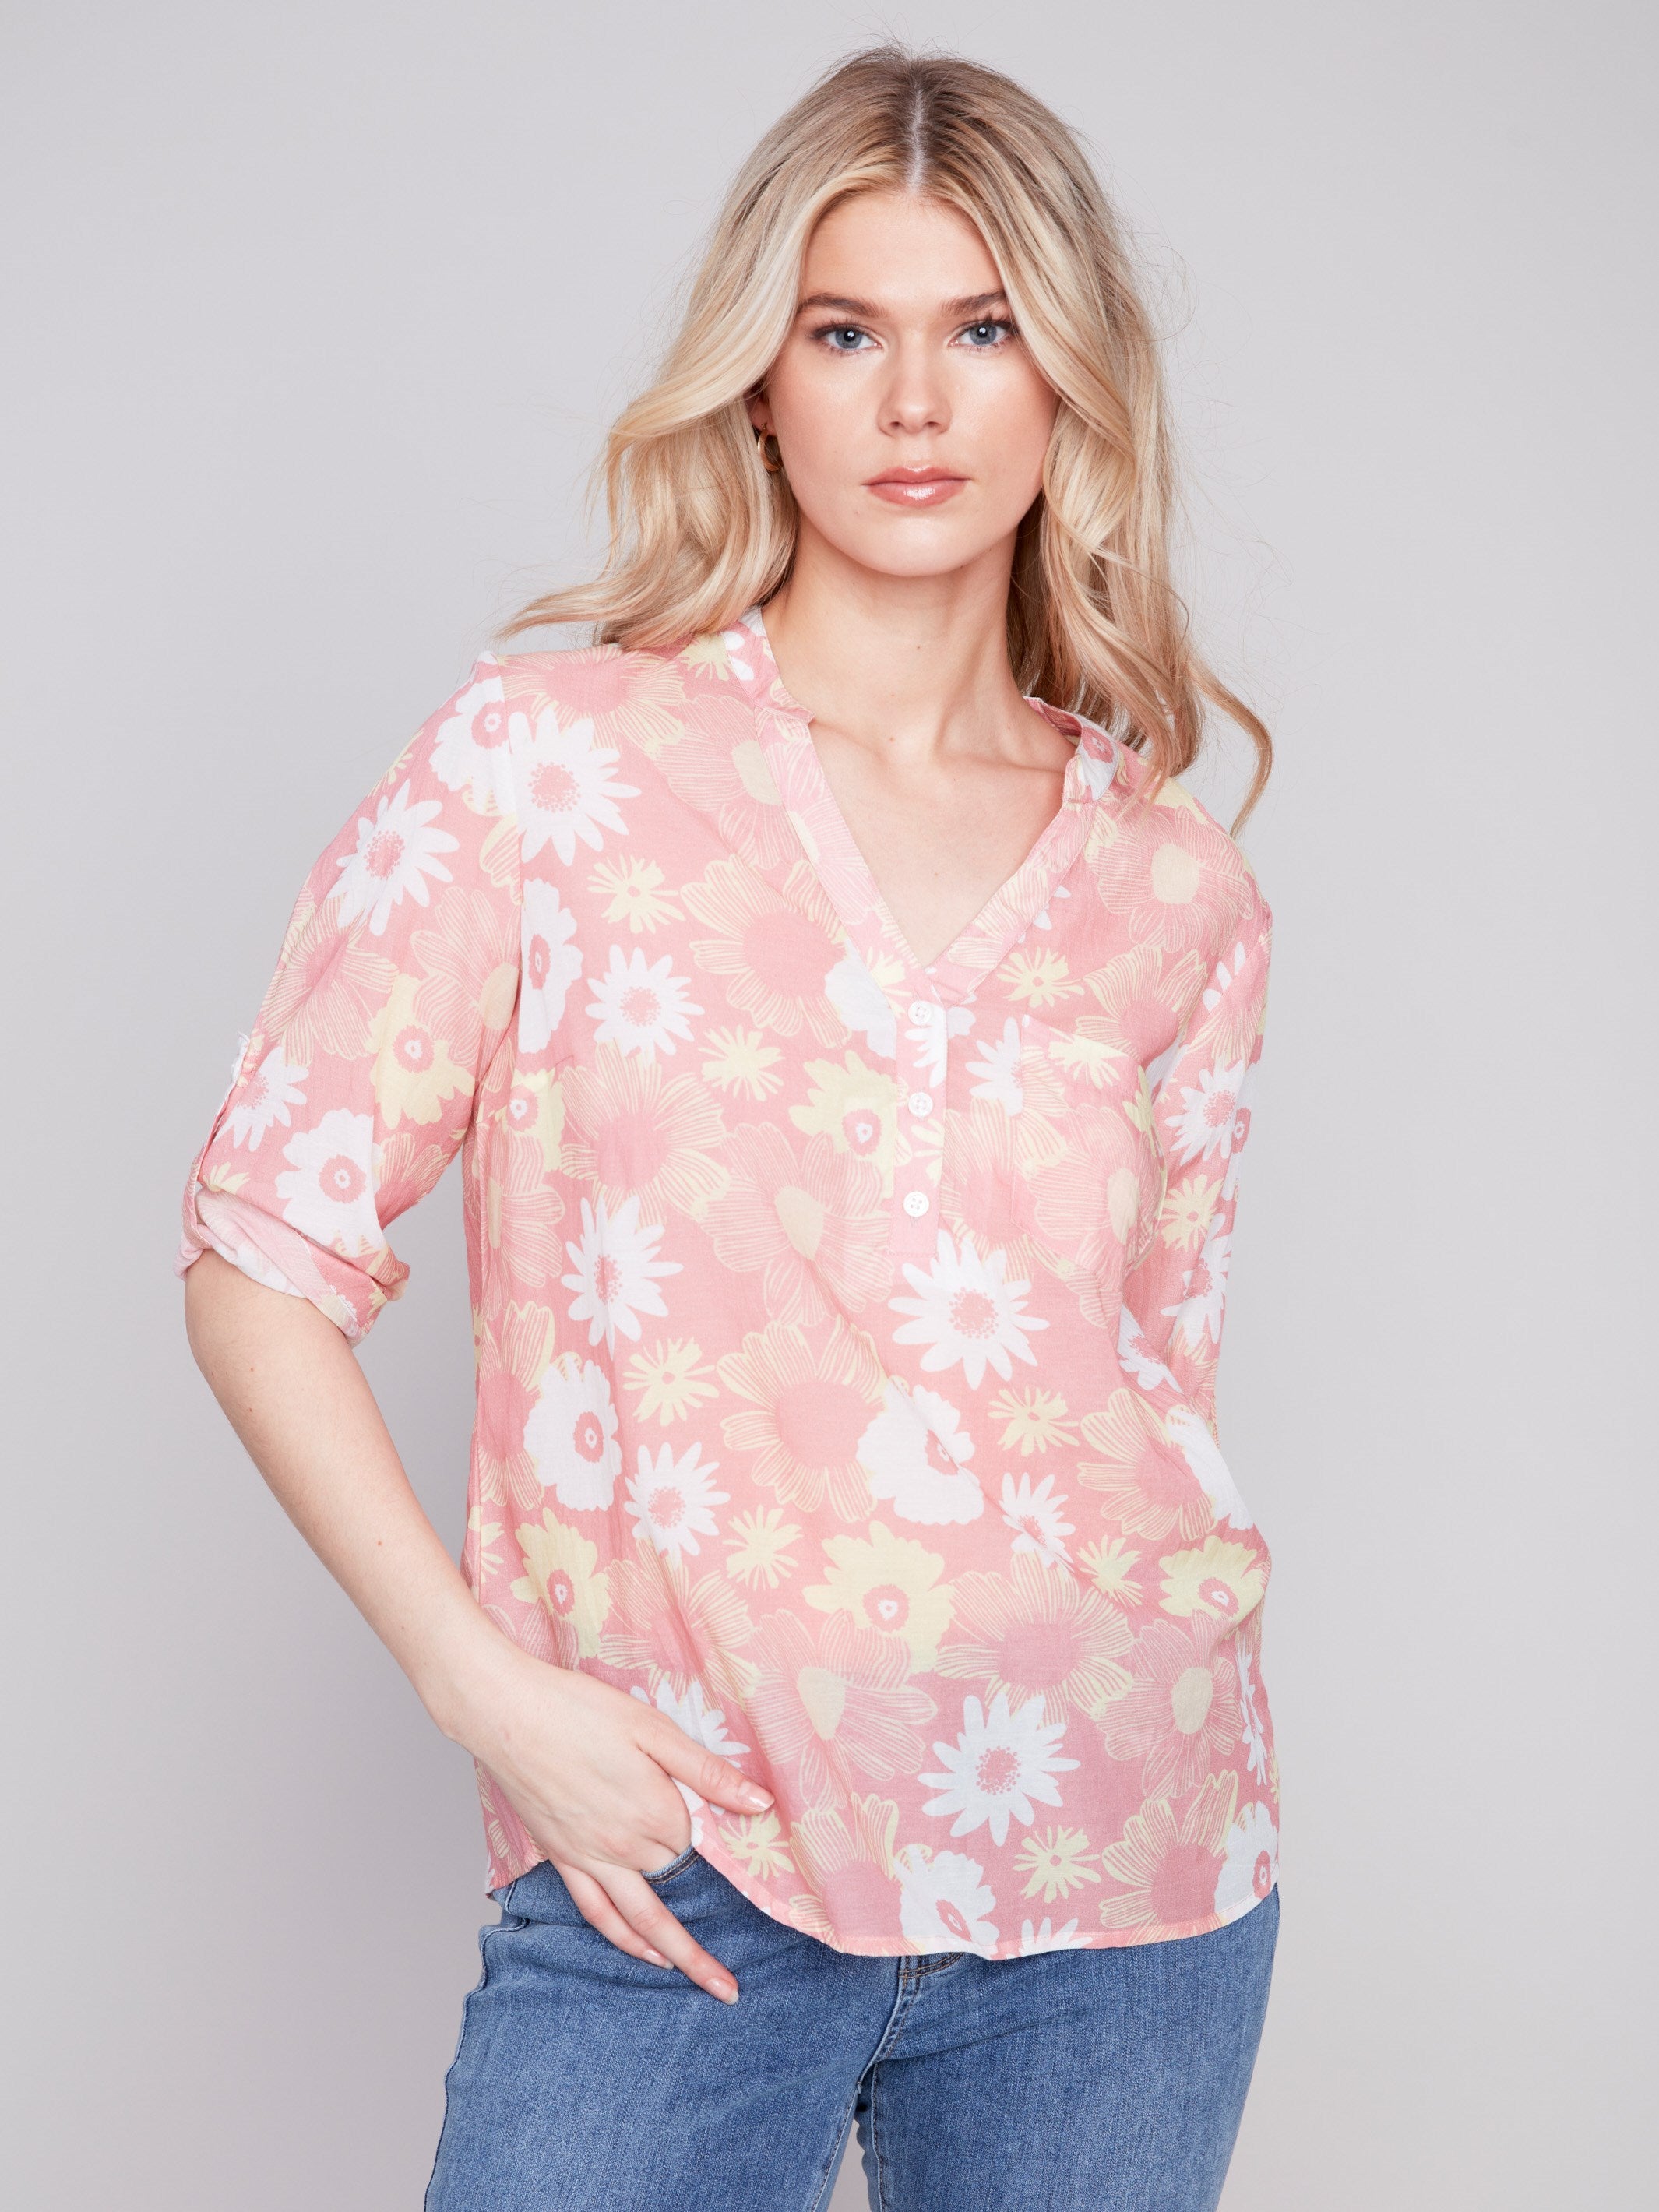 Charlie B Printed Half-Button Blouse - Cosmos - Image 1